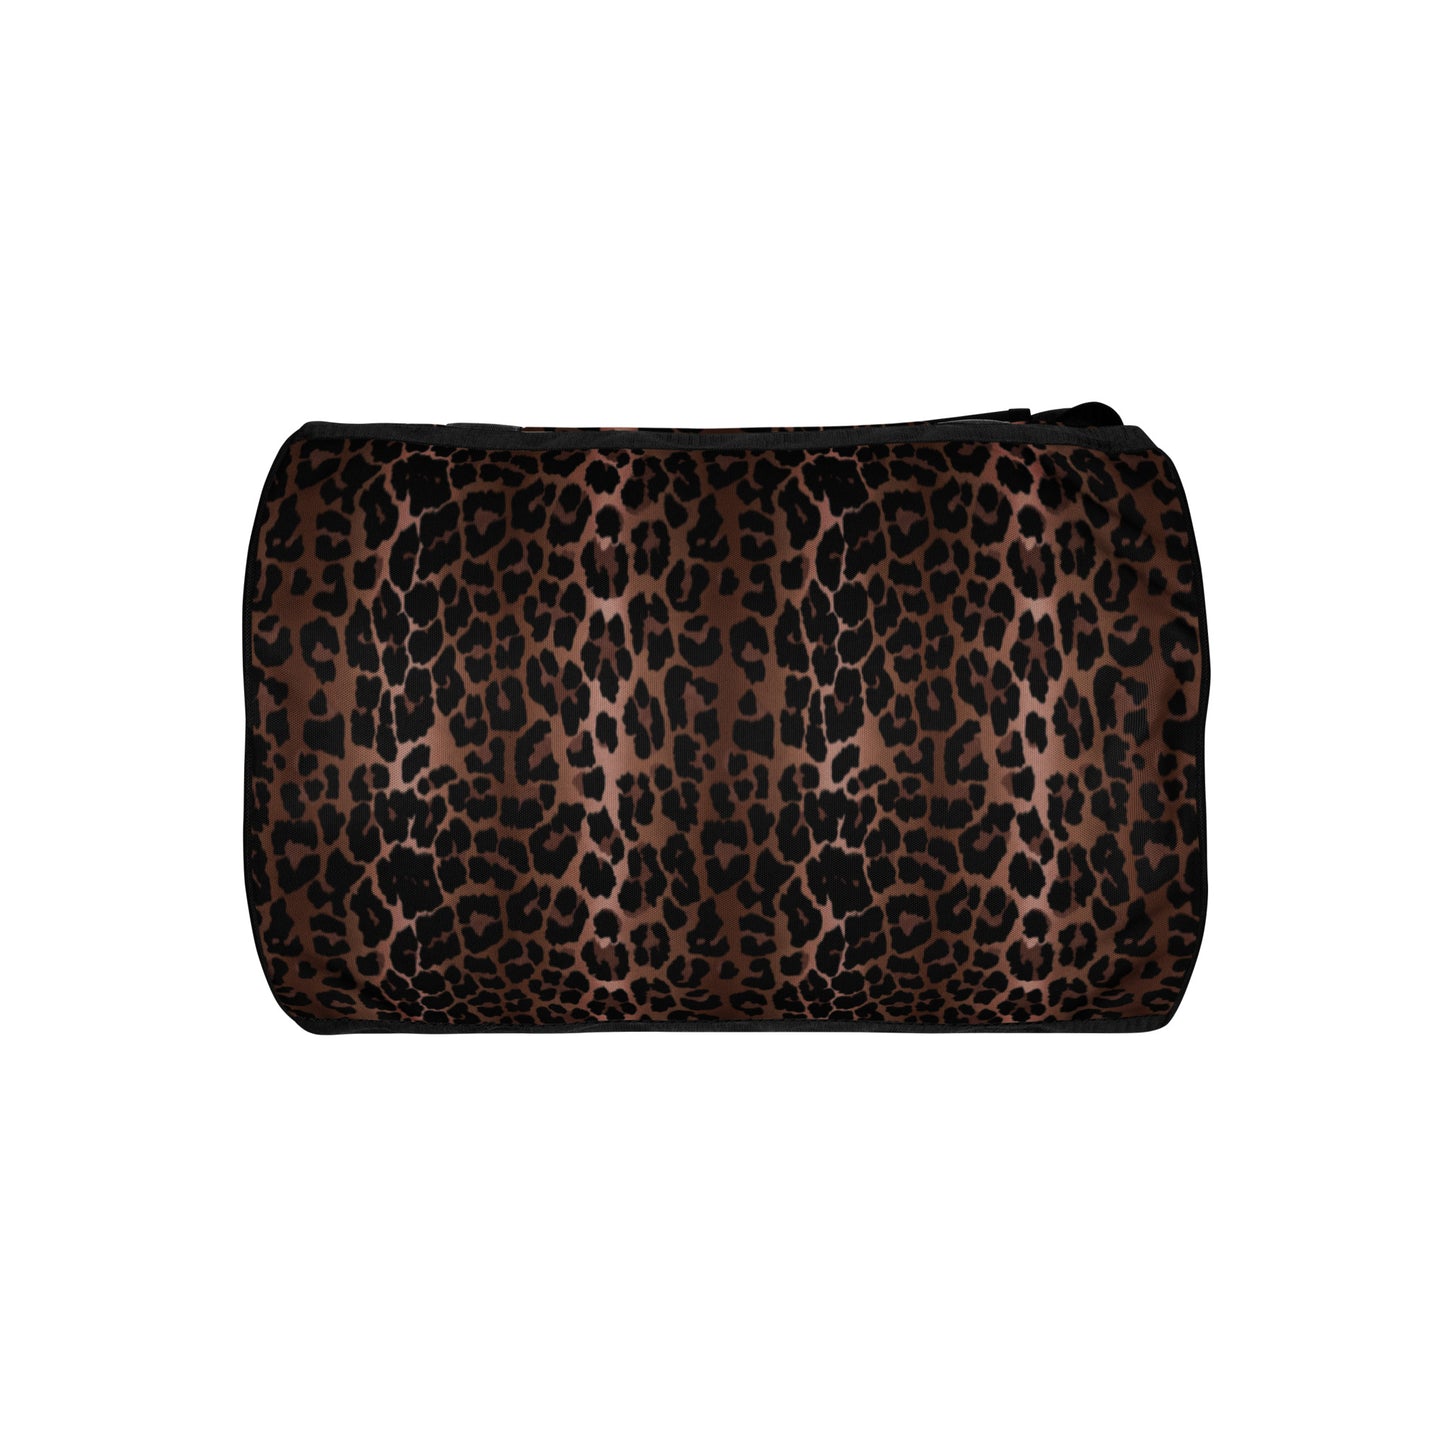 Overnighter Carryon Workout Duffle Bag in OG Leopard Print | Pinup Couture Relaxed